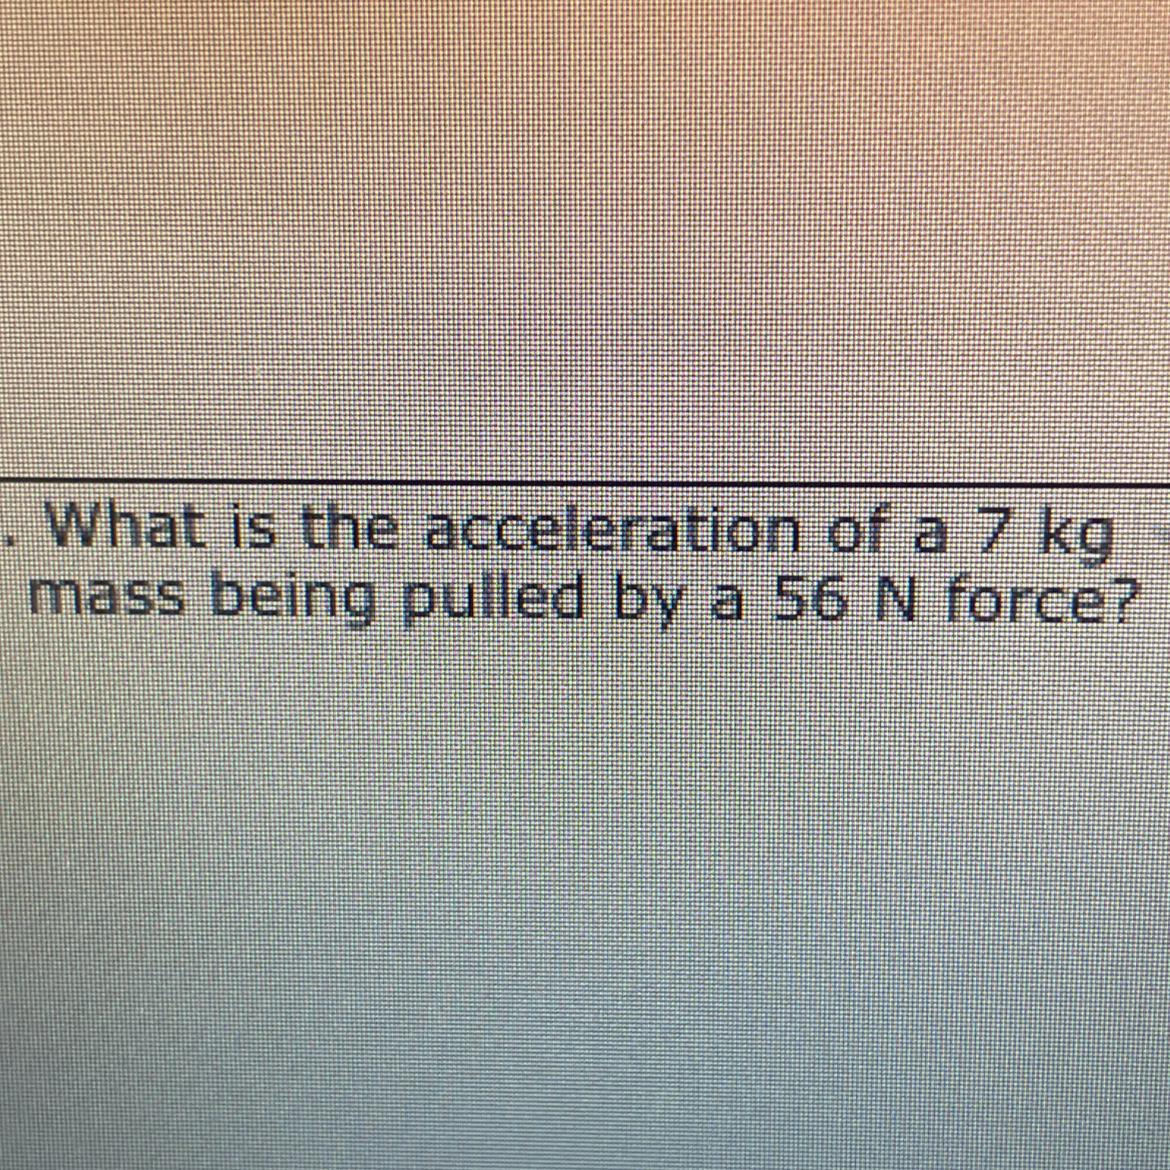 What Is The Acceleration Of A 7 Kgmass Being Pulled By A 56 N Force?